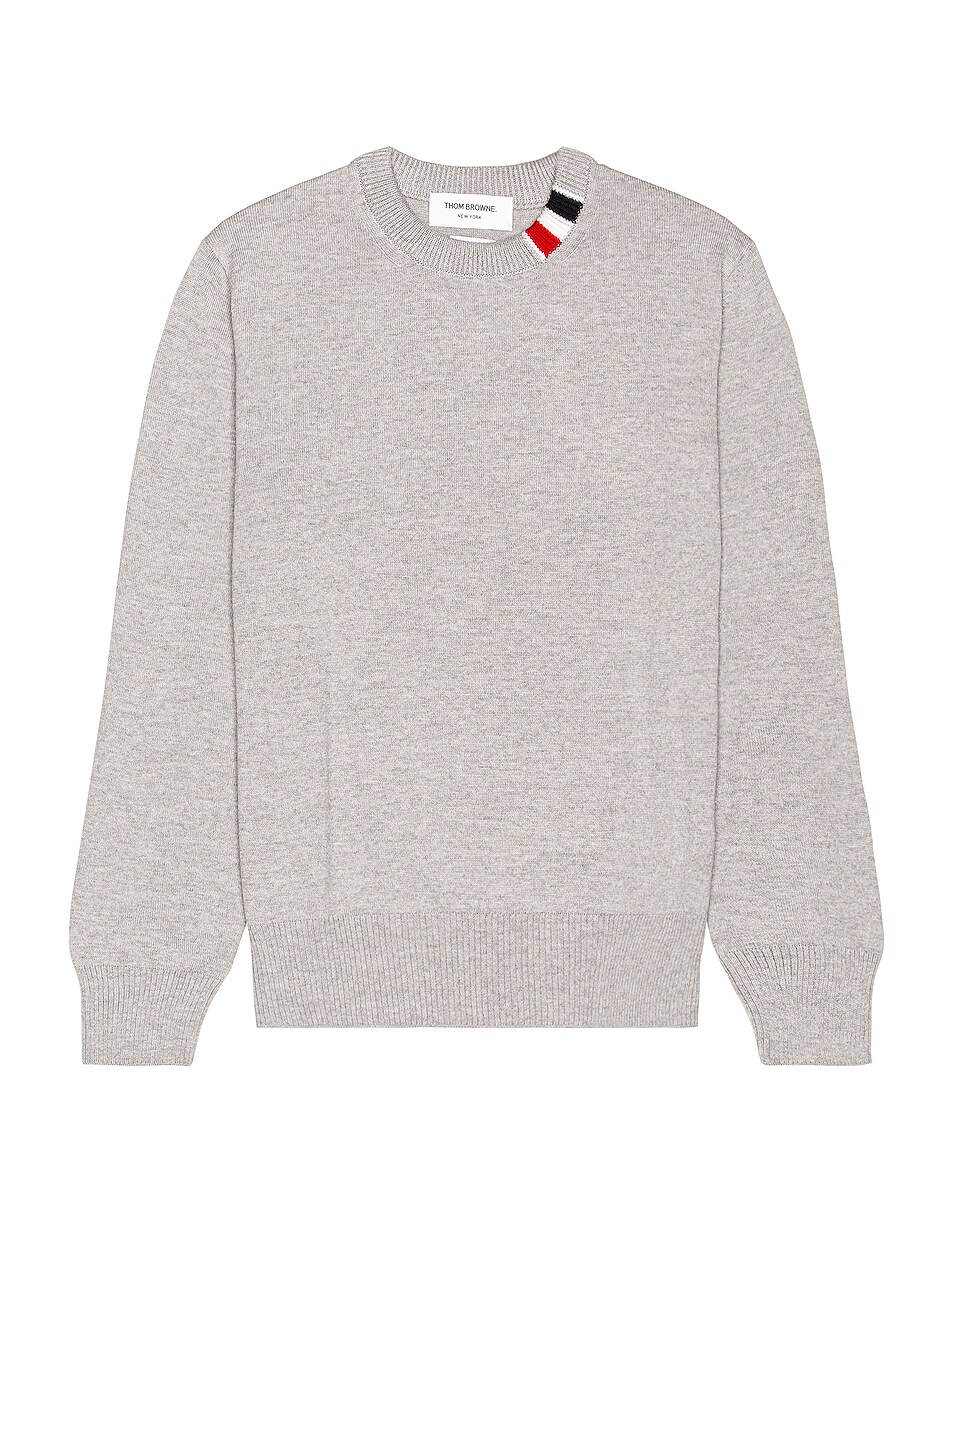 Image 1 of Thom Browne Relaxed Fit Crewneck Sweater in Pastel Grey